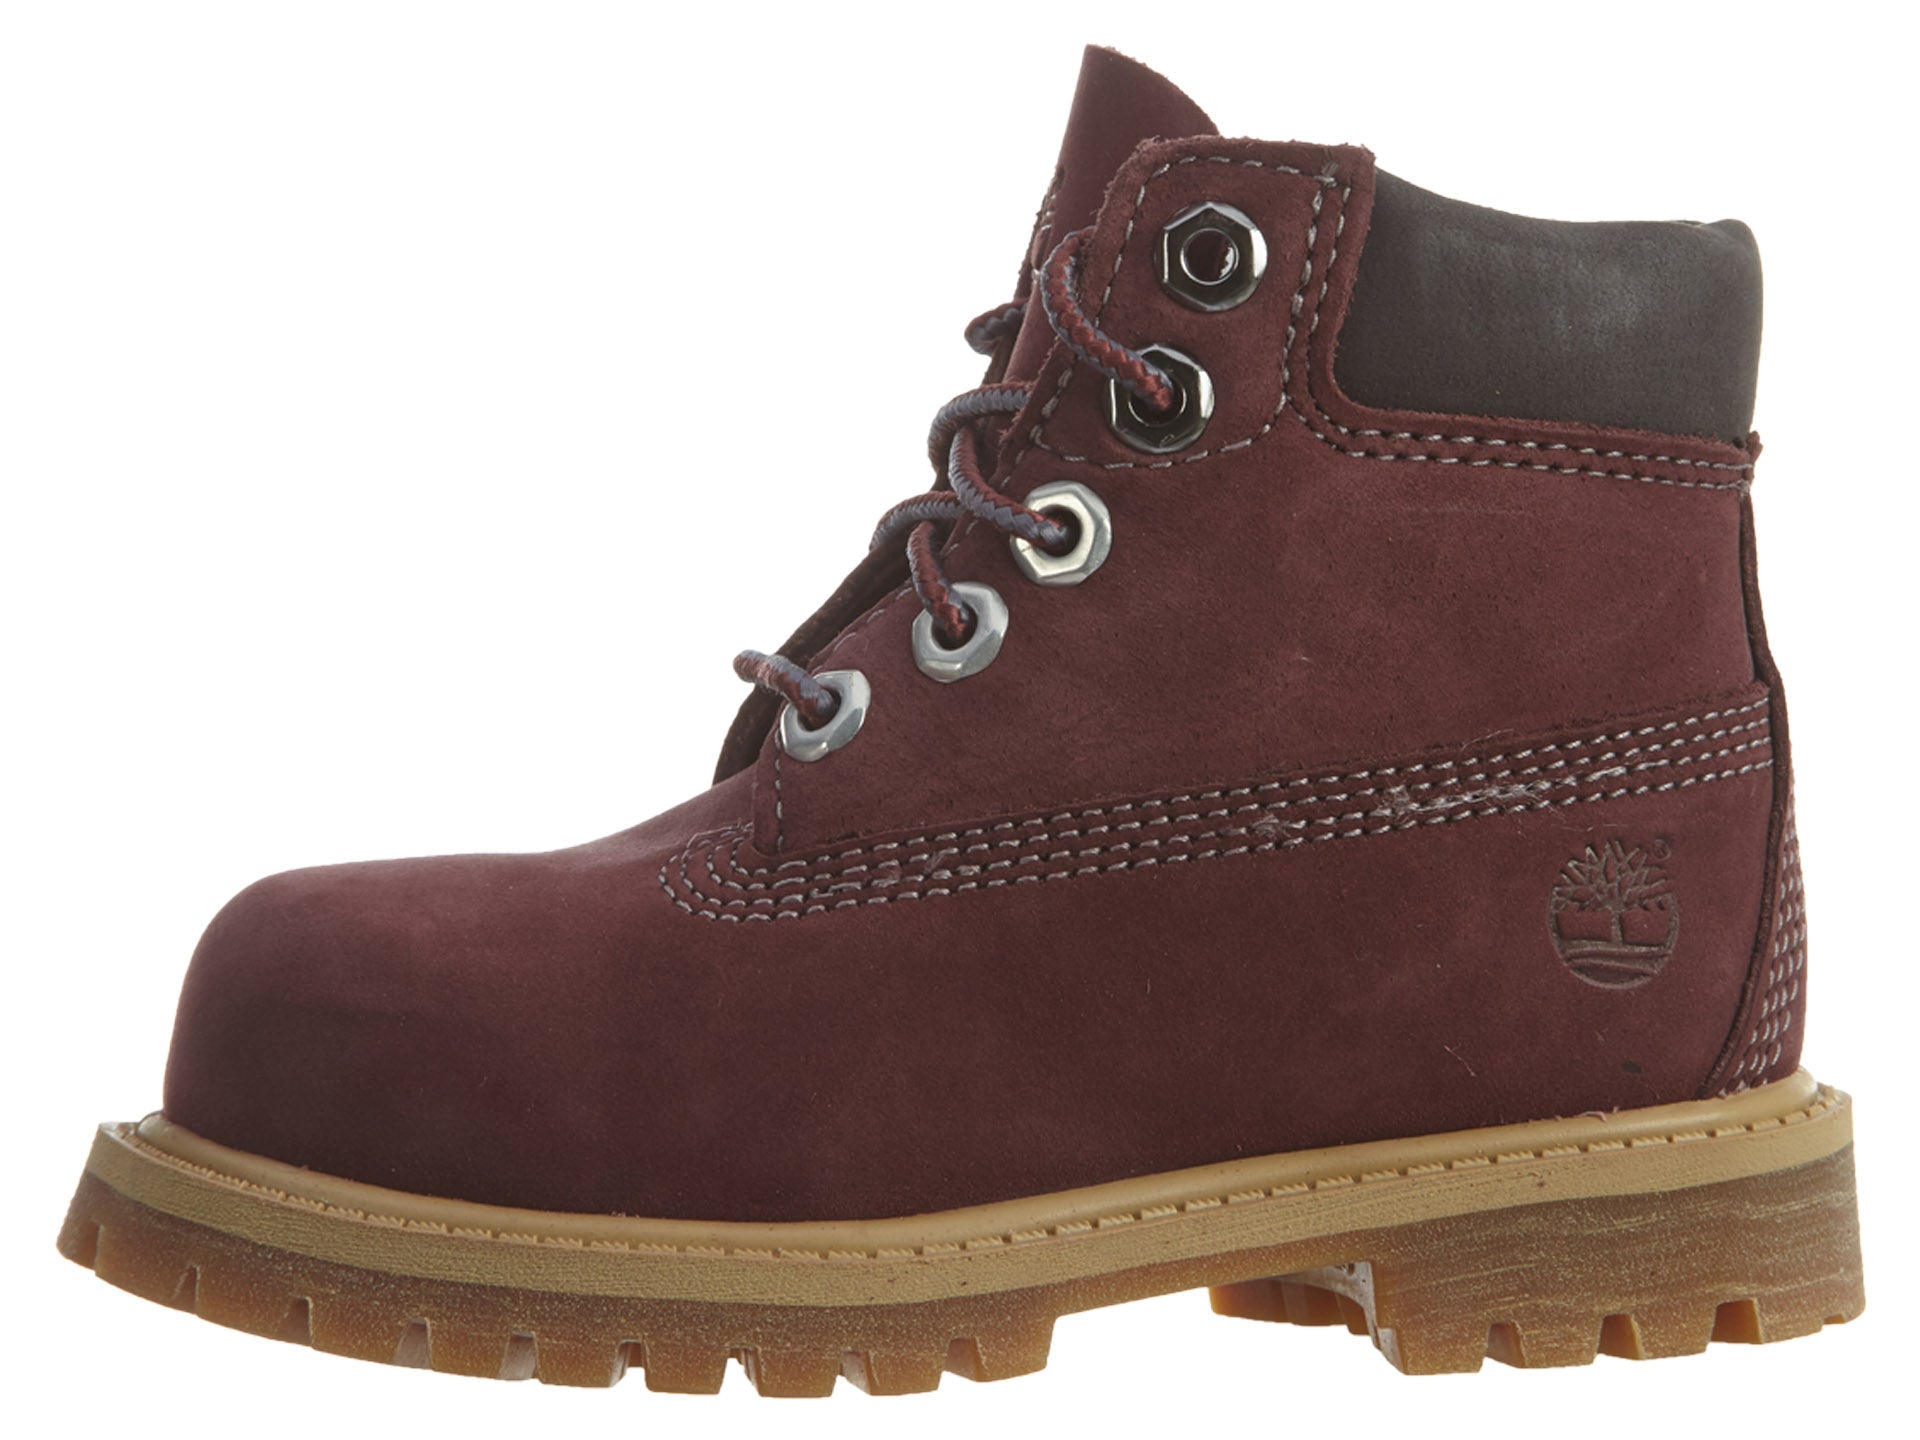 Timberland 6" Premium Boot Toddlers Style : Tb0a1bcx